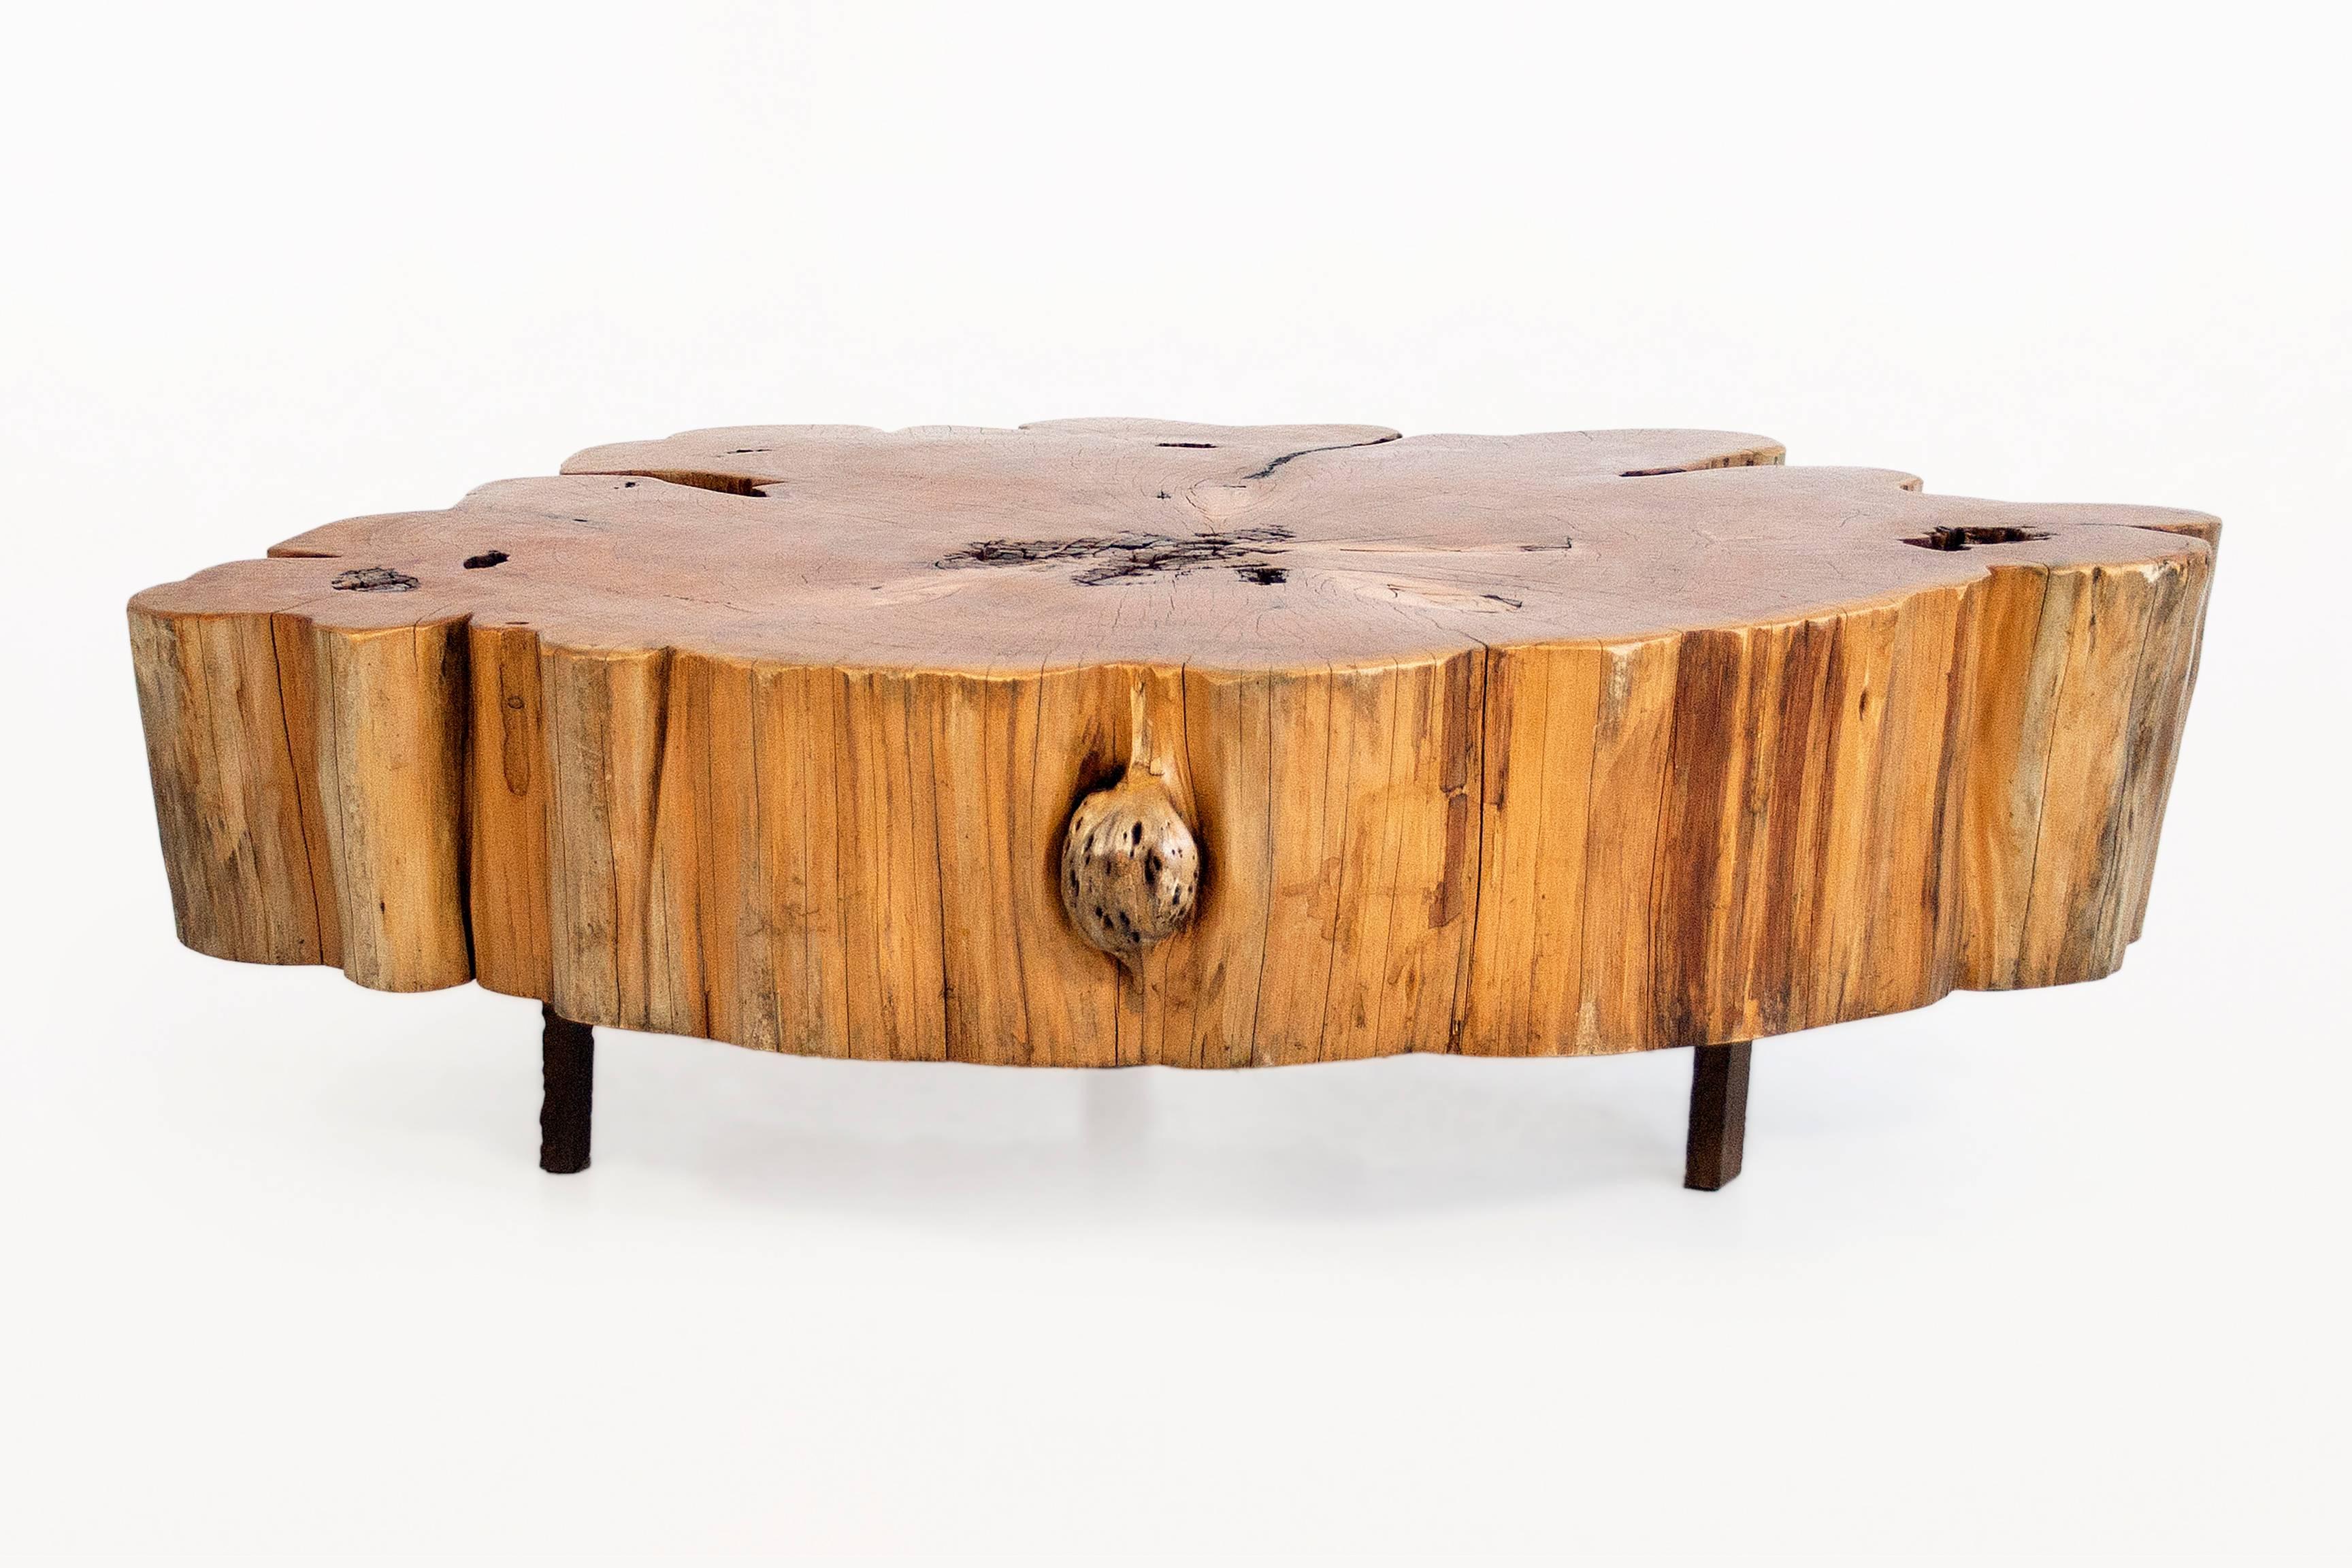 Cypress Tree-Trunk Coffee Table
European Cypress on Top of Three Hammered-Iron Legs 
Very Large Diameter
Circa 2000, France
Very Good Condition